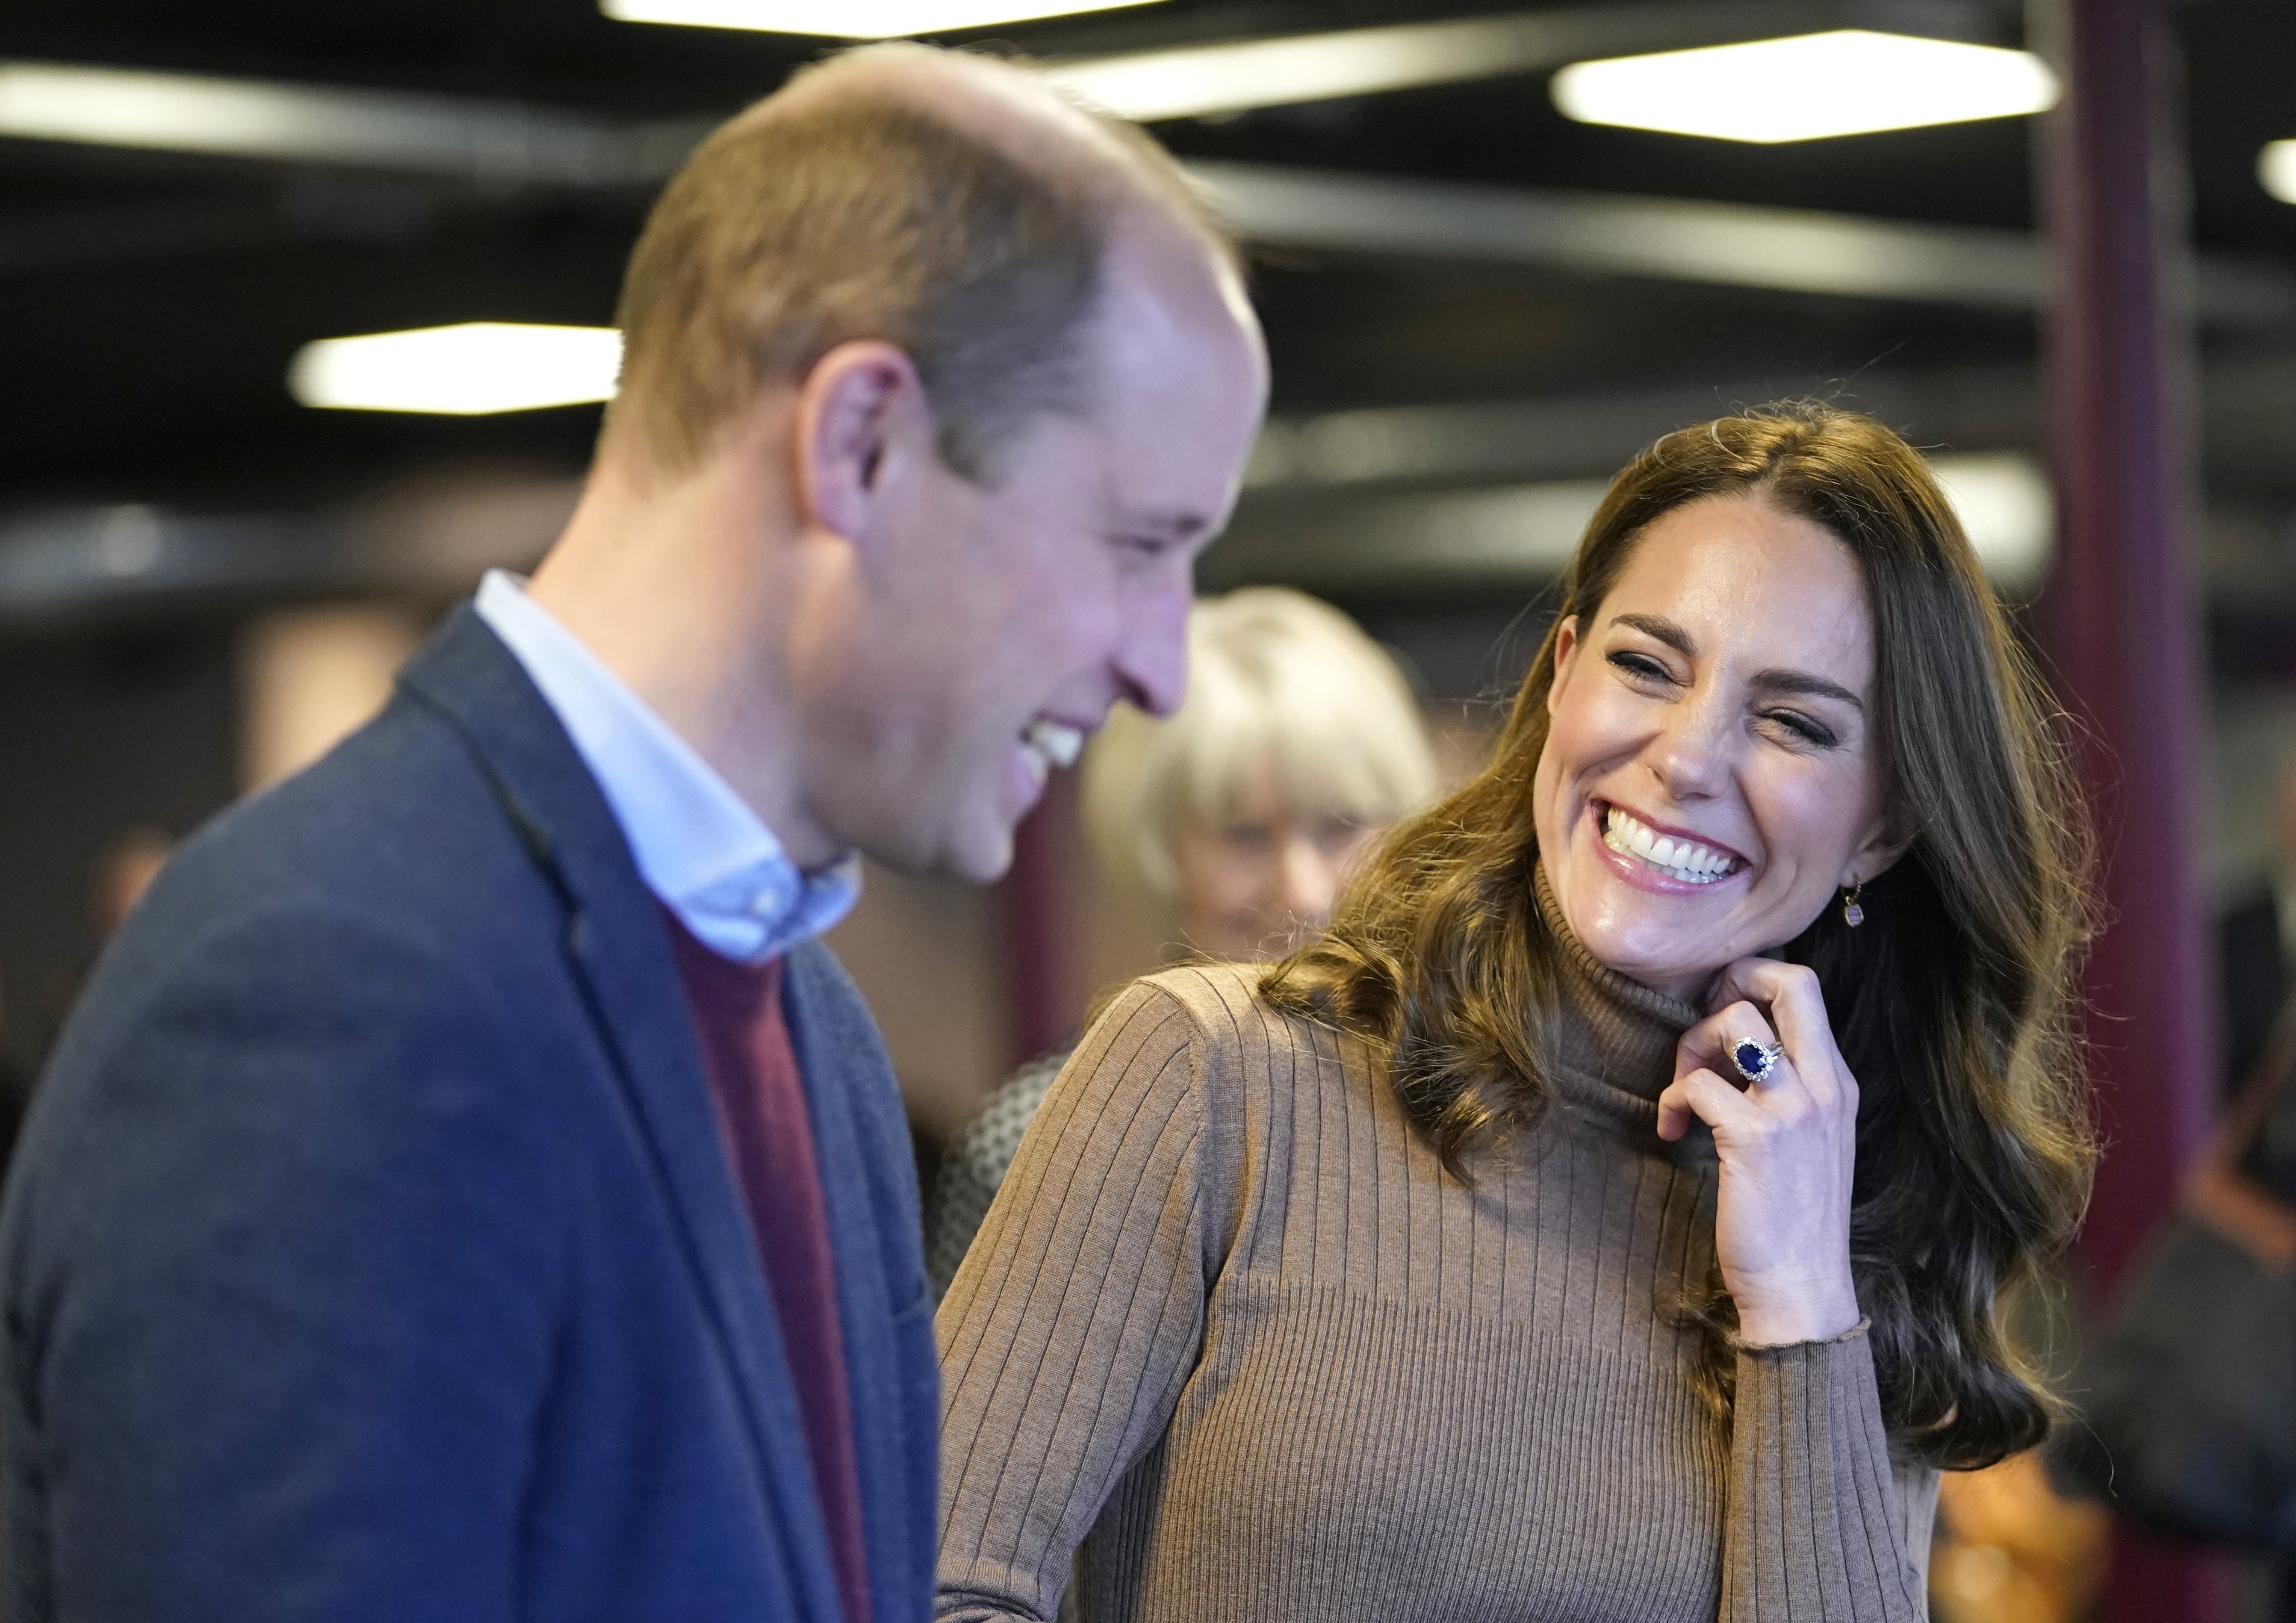 The Duke and Duchess of Cambridge during a visit to the Church on the Street in Burnley (Danny Lawson/PA)